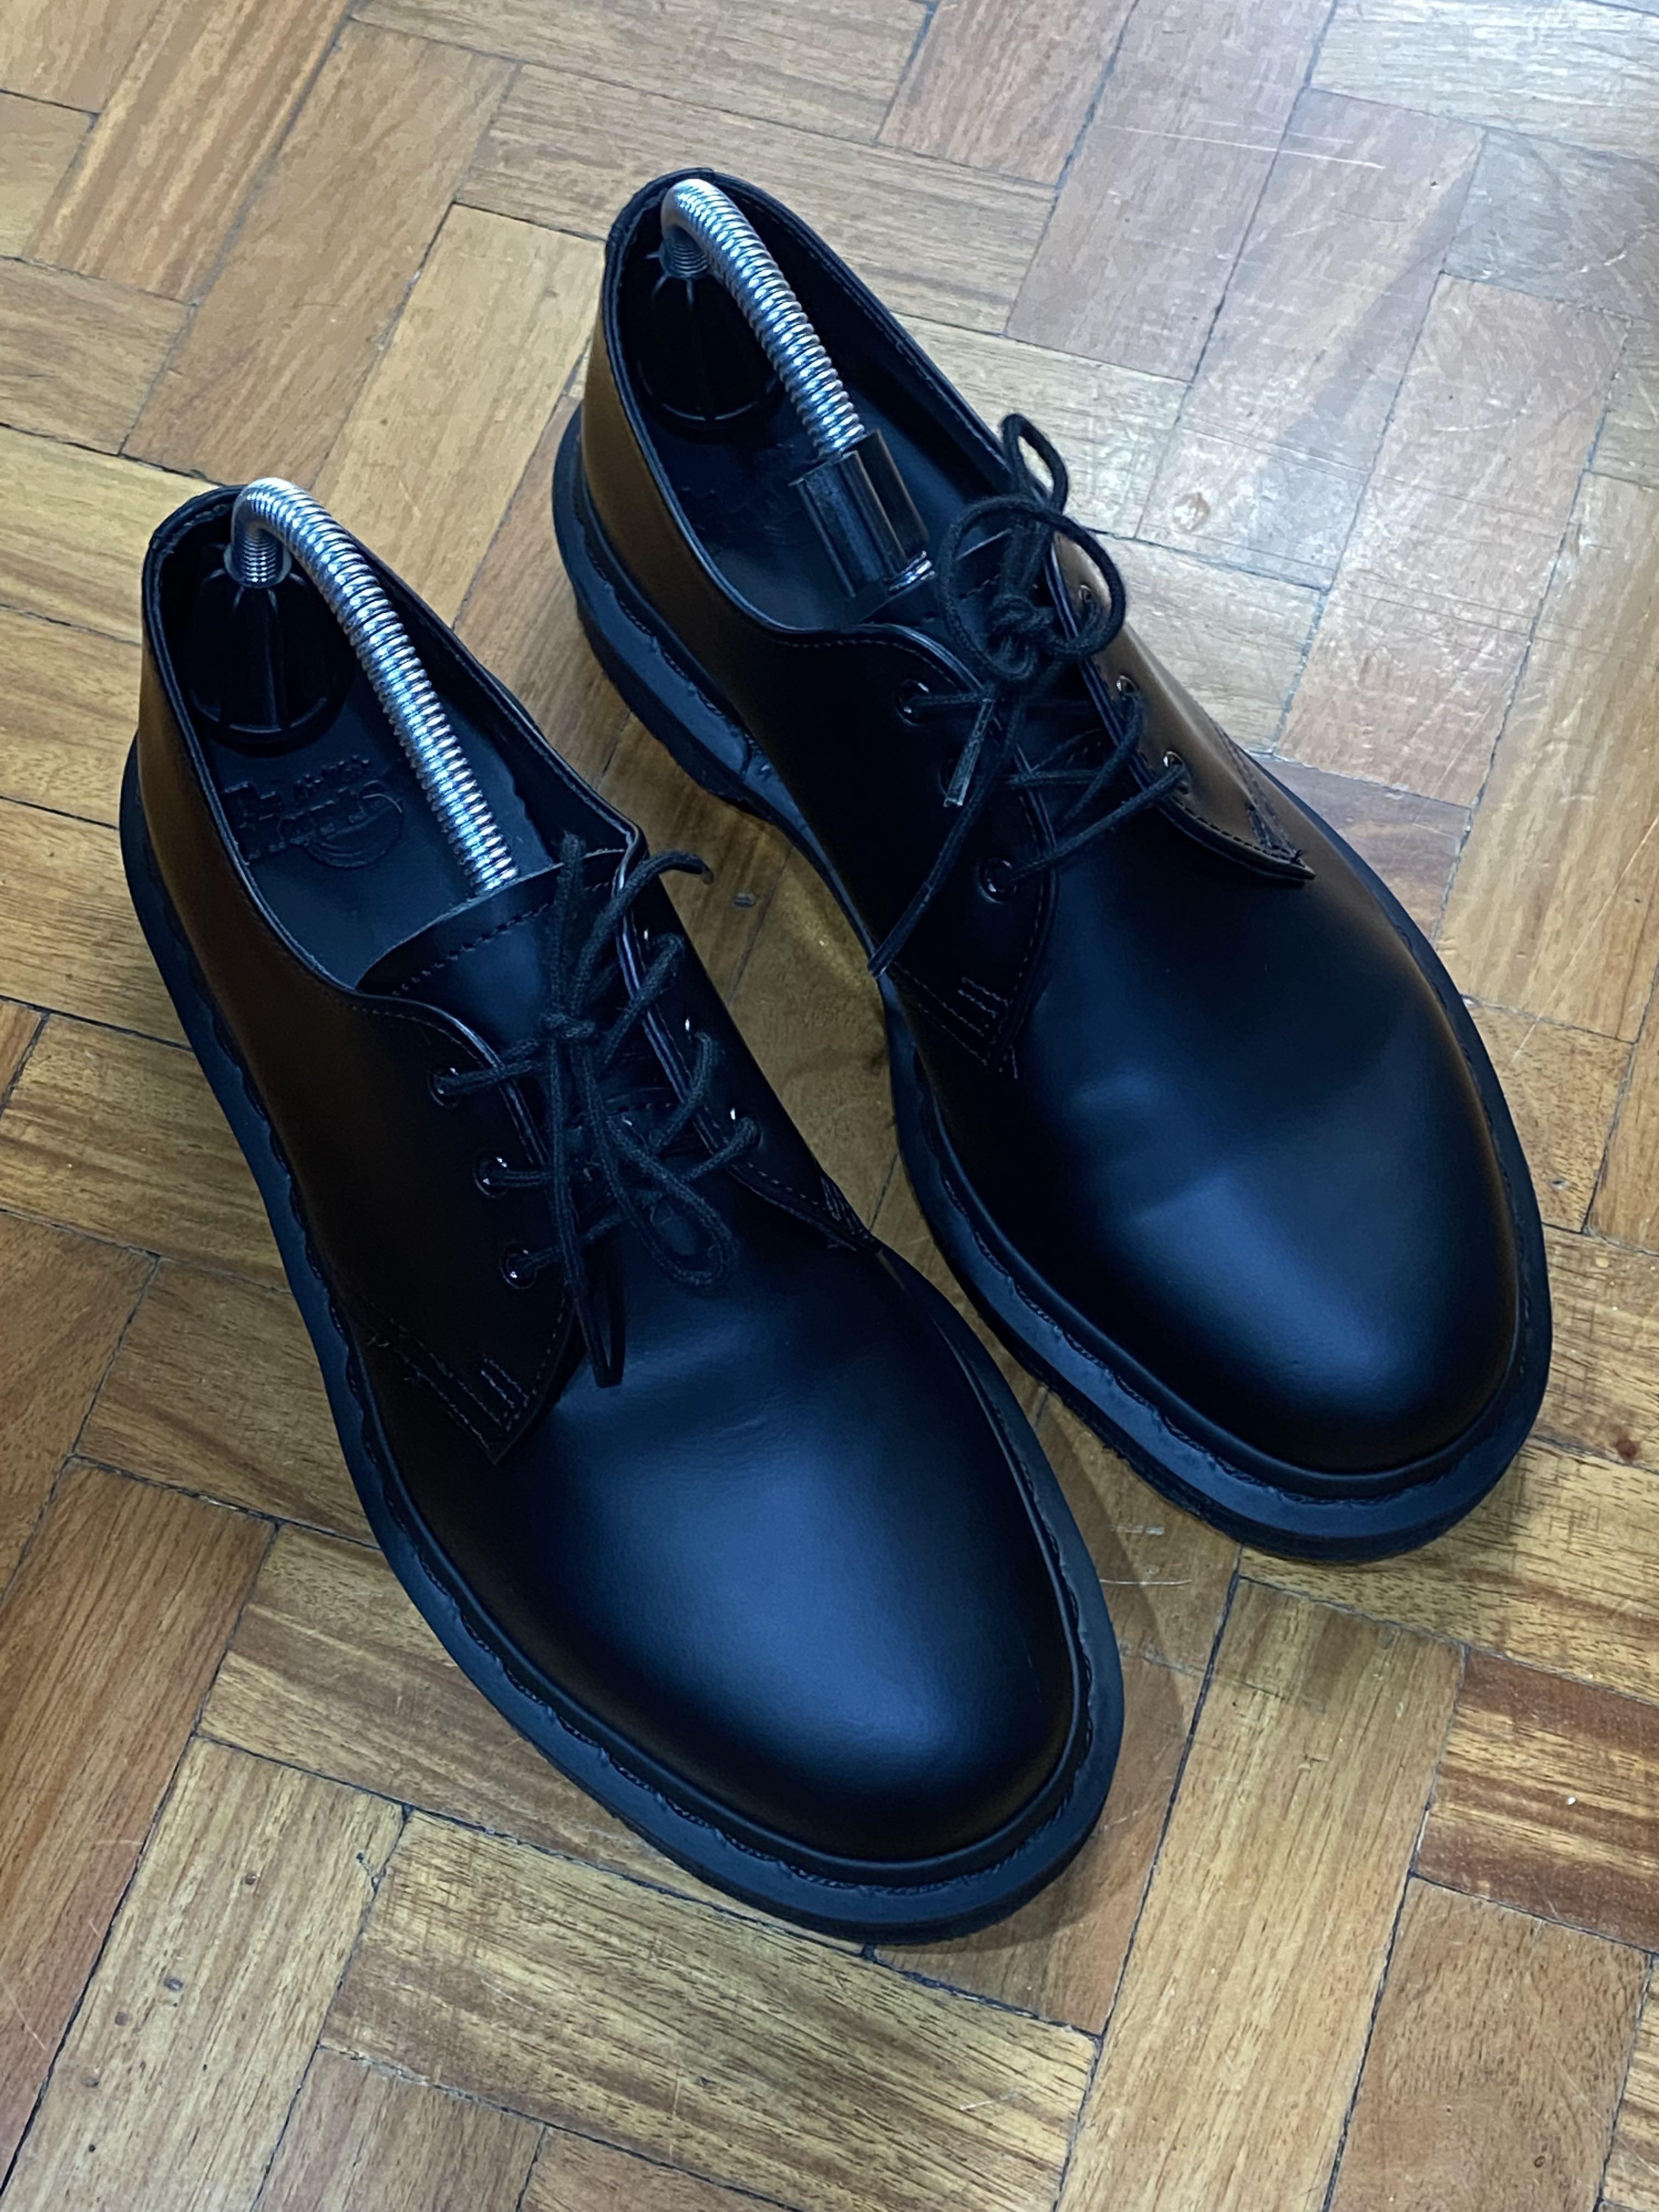 Dr. Martens 1461 Mono Smooth Leather Oxford Shoes, Men's Fashion ...